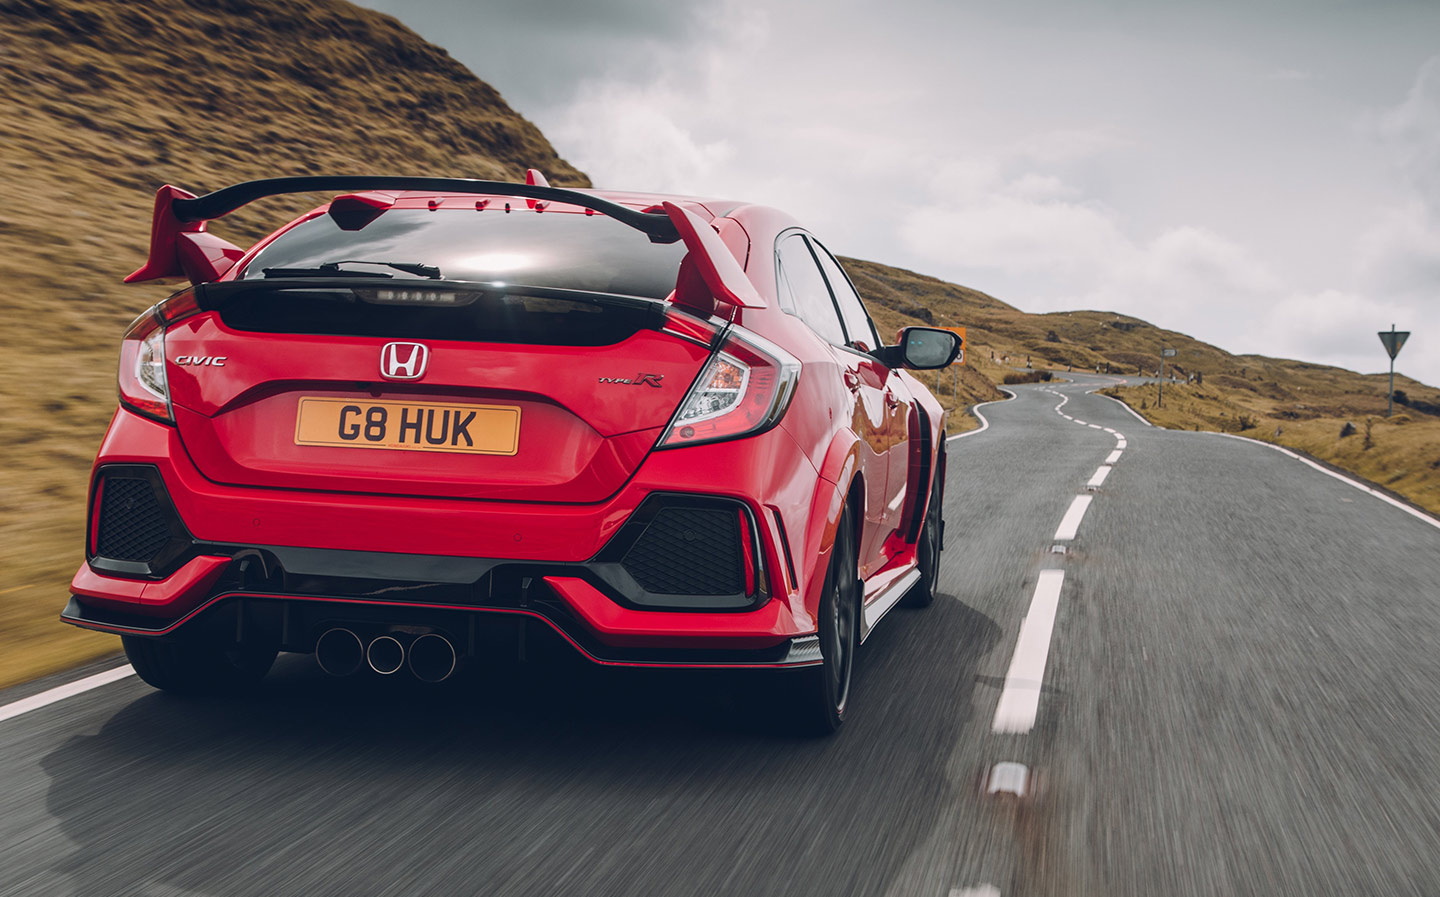 2017 Honda Civic Type R review by Jeremy Clarkson for Sunday Times Driving